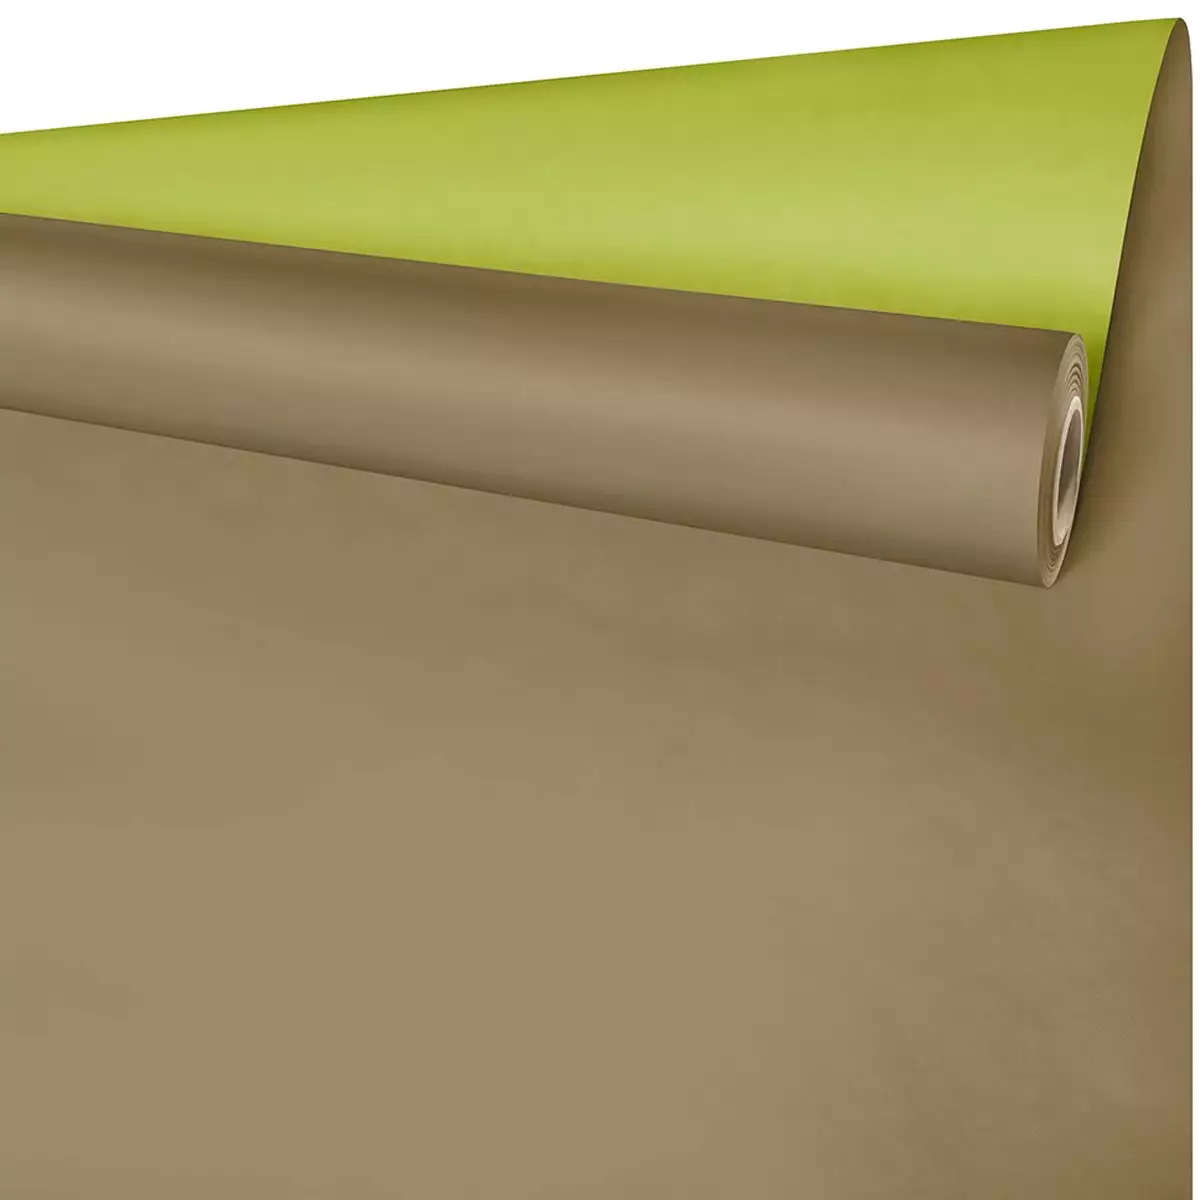 DUO PLAIN SMOOTH OFFSET PAPER ROLL 0.79X50 M MARRON